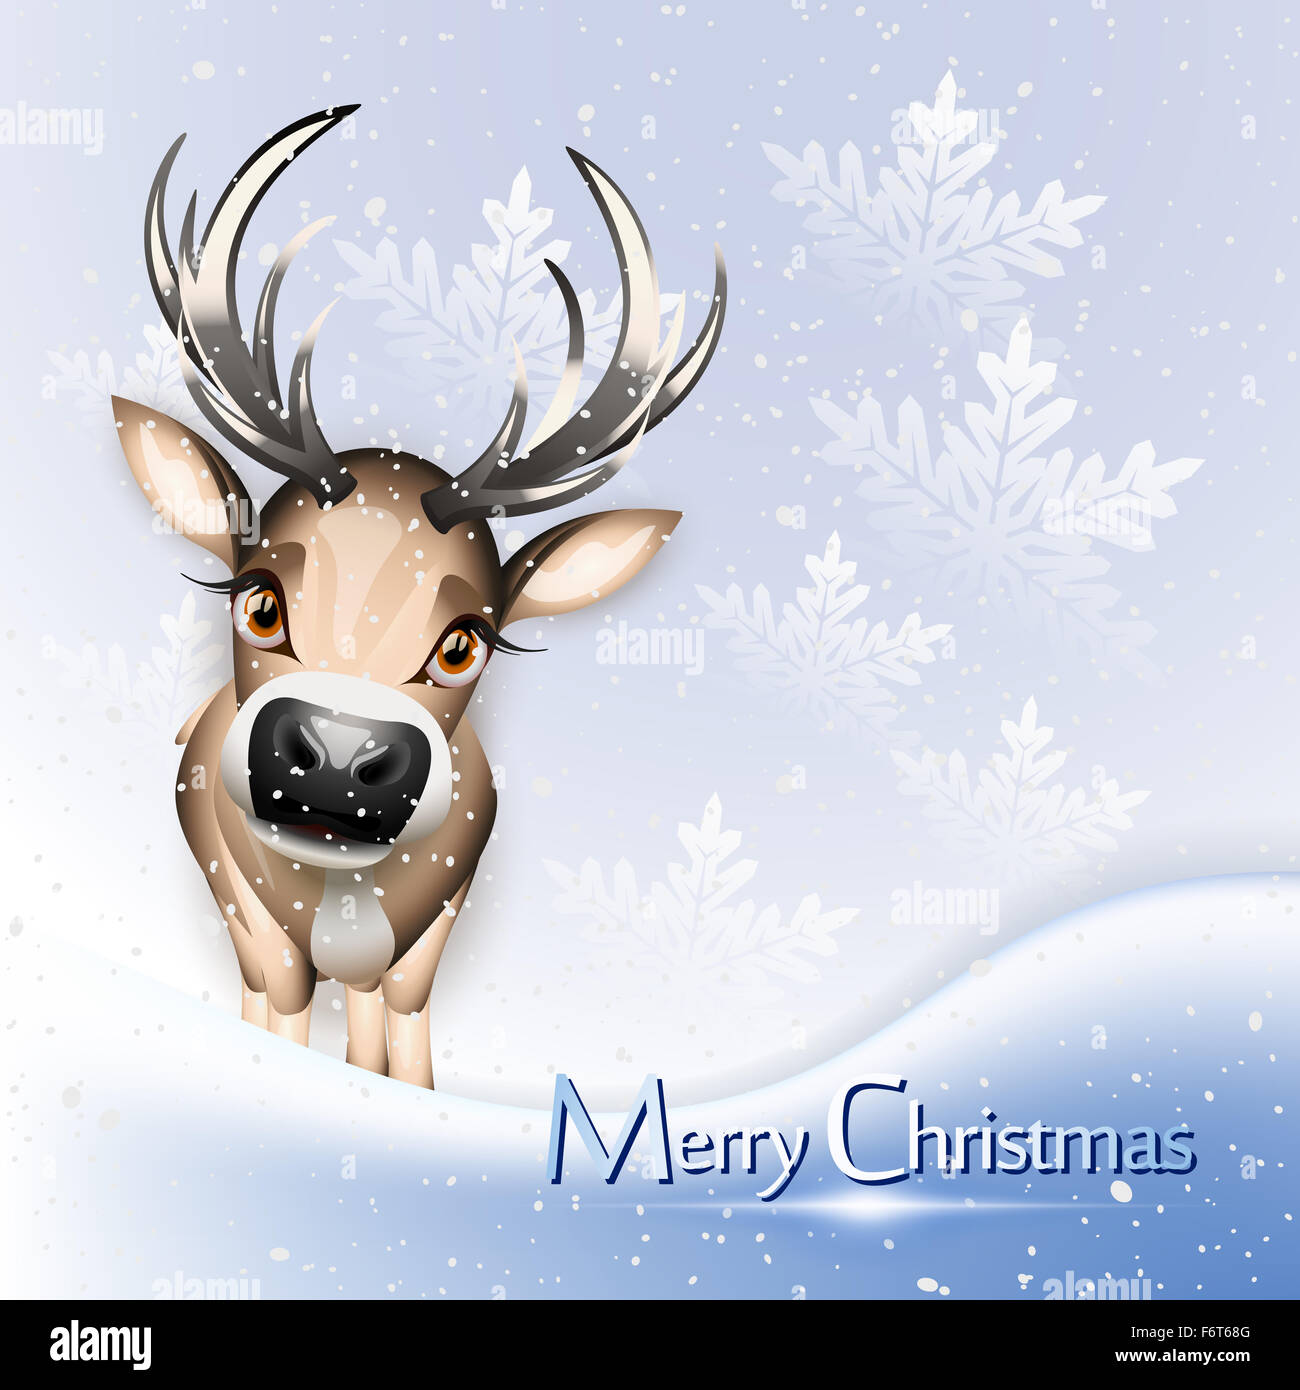 Christmas blue card with cute reindeer over snow Stock Photo